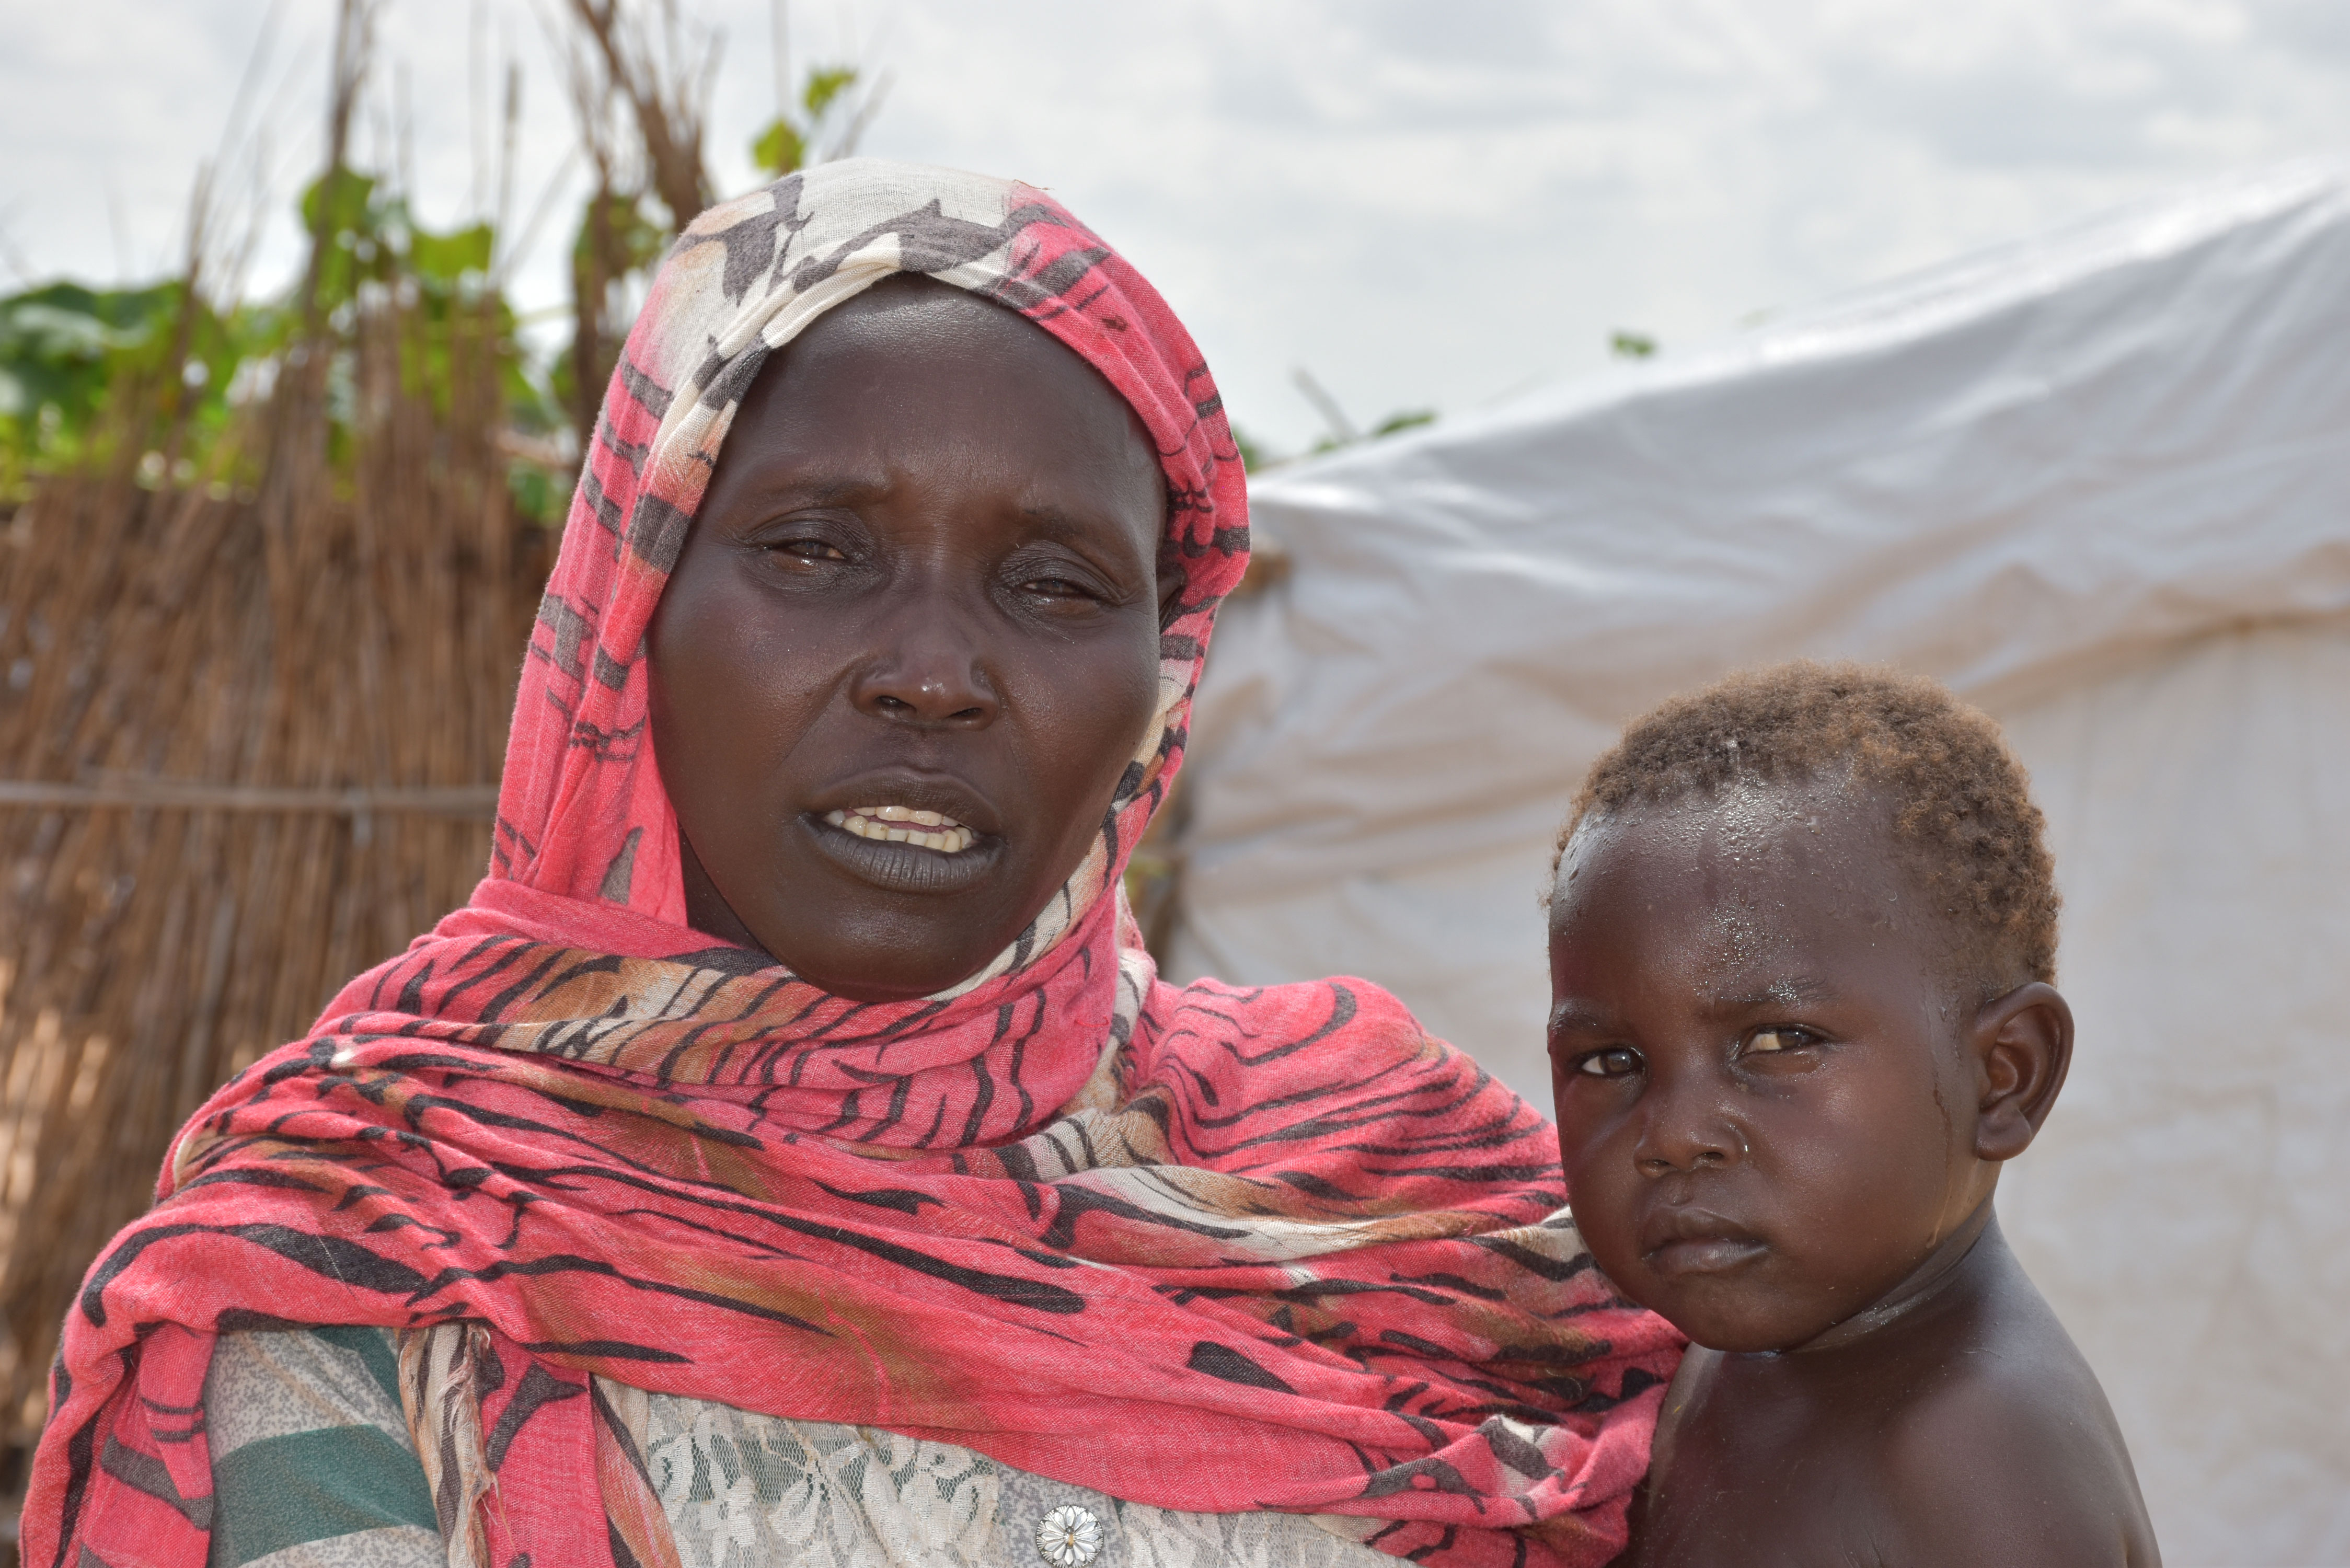 35-year-old Salwa Ramadan is a refugee from South Sudan works with her family to reconstruct family’s shelter